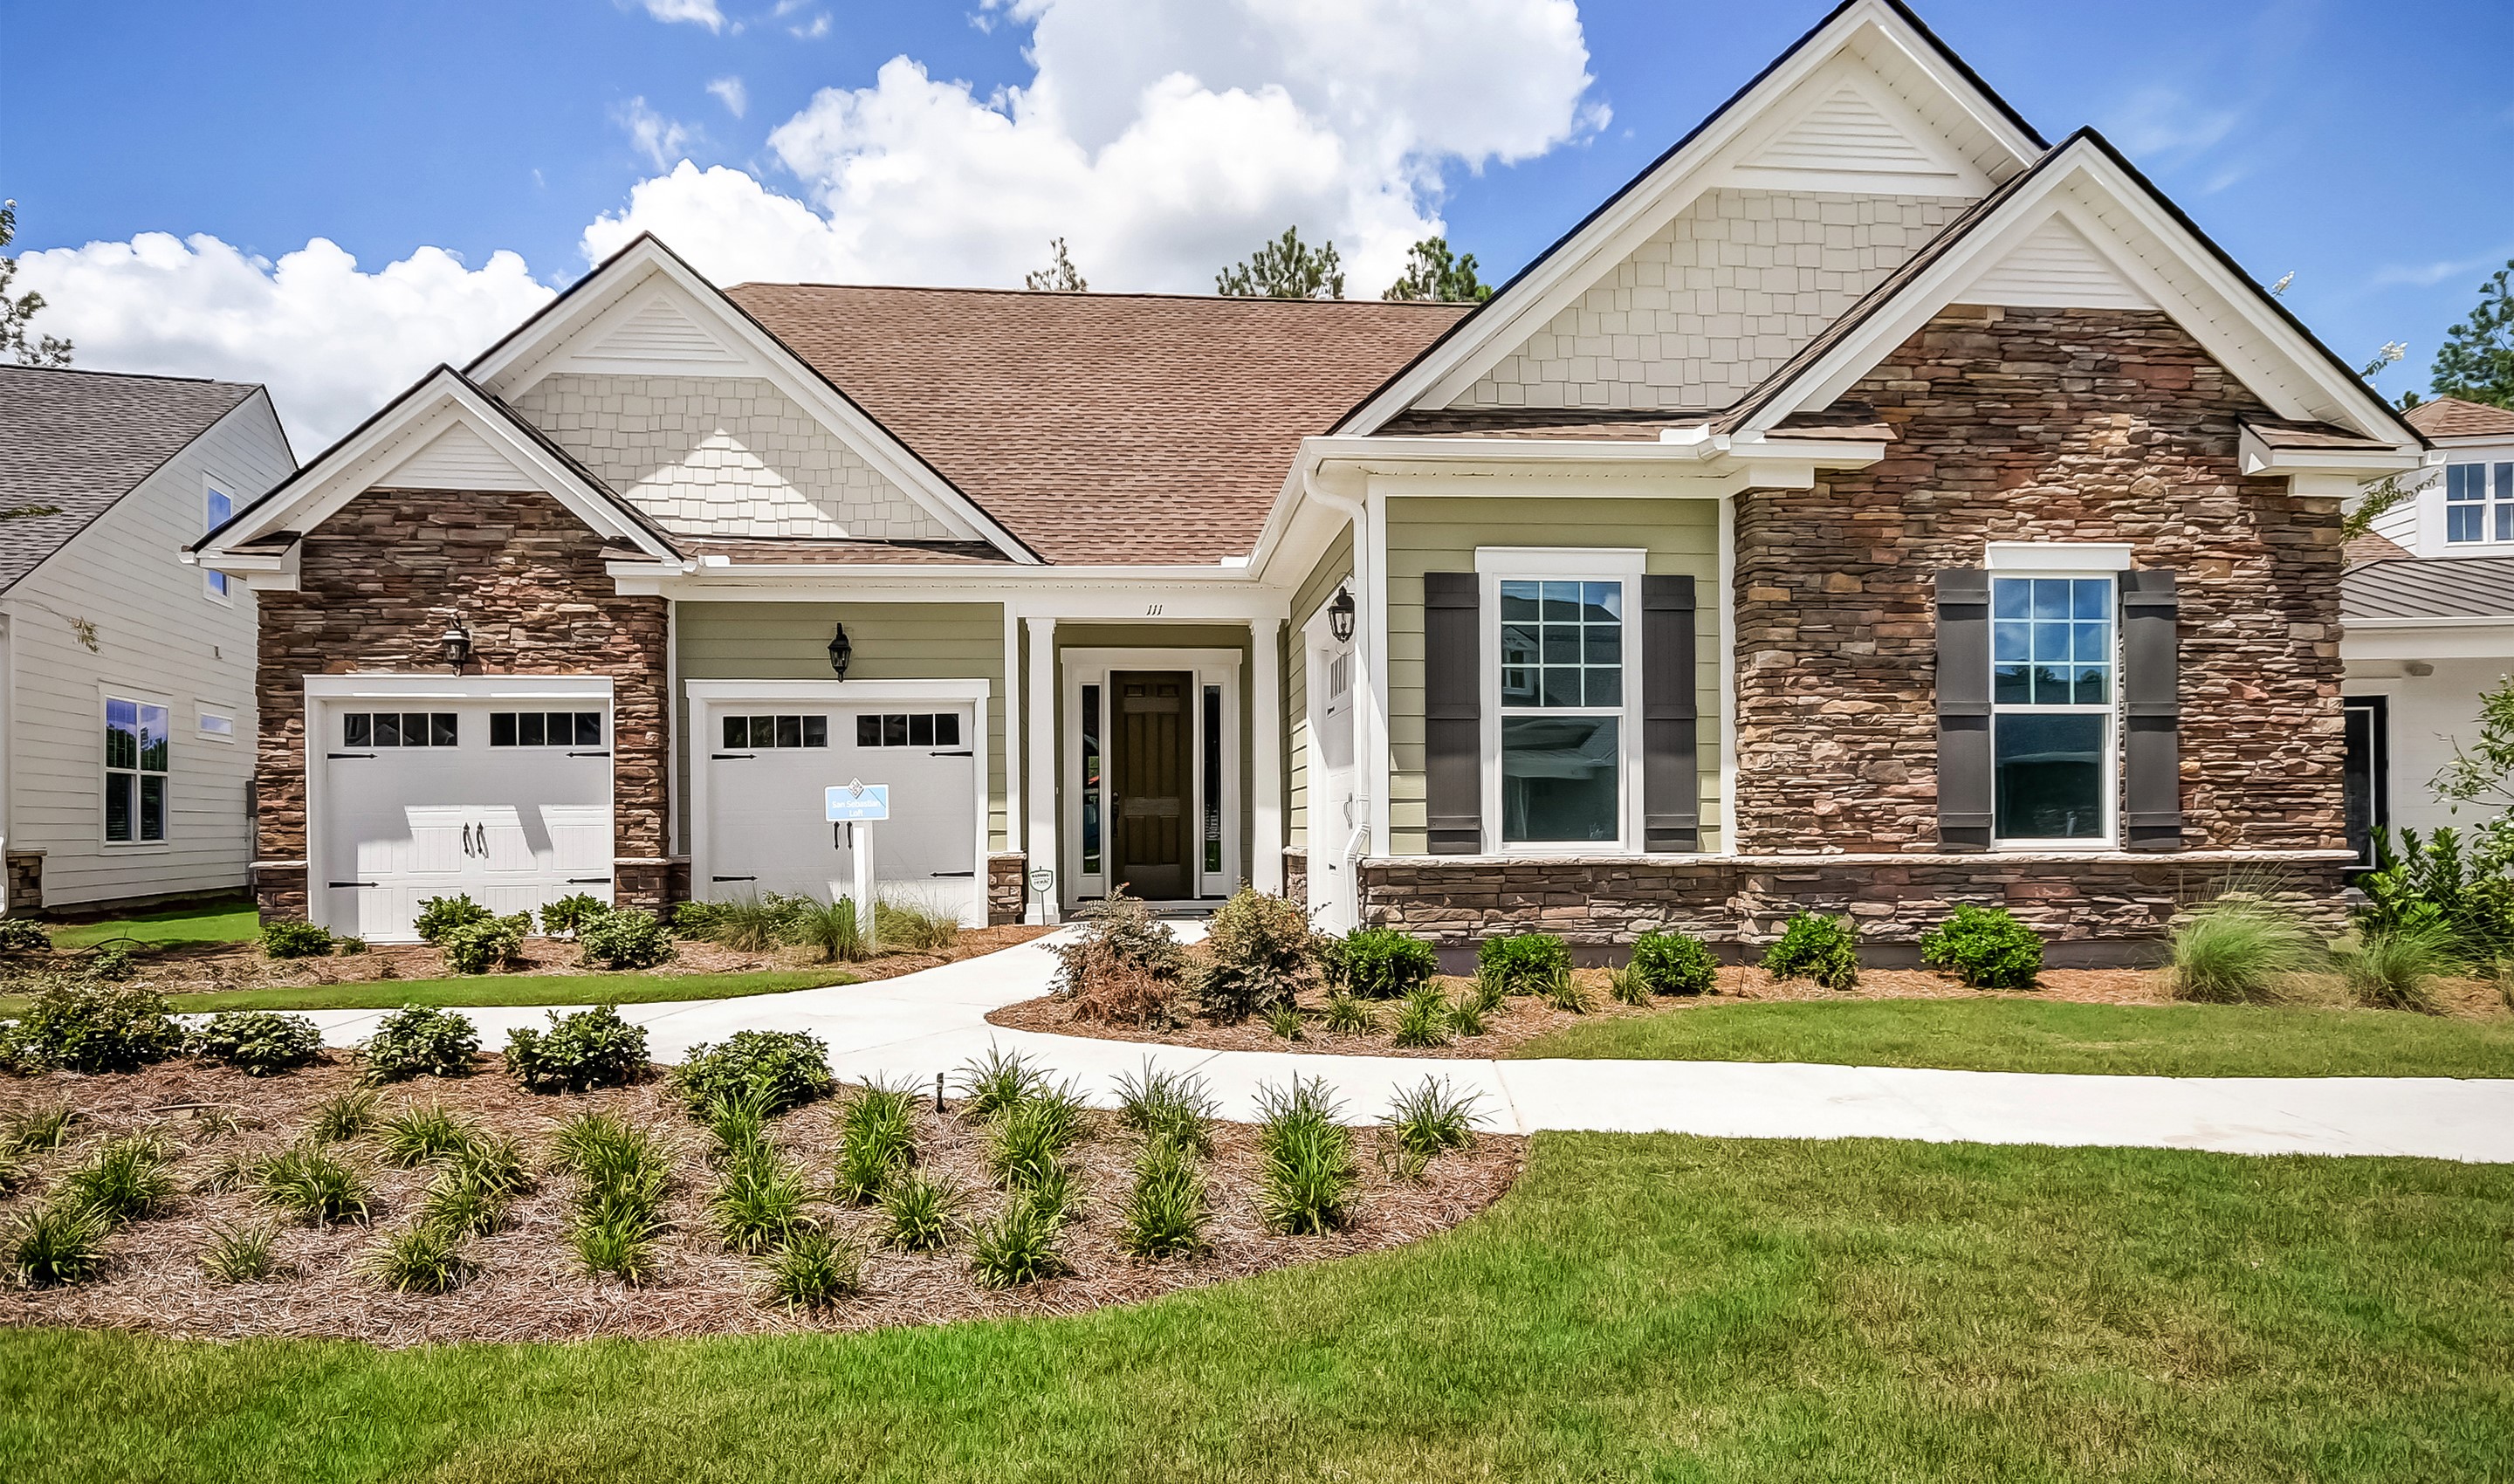 K Hovnanian S Four Seasons At Lakes Of Cane Bay 55 Community In Summerville Sc